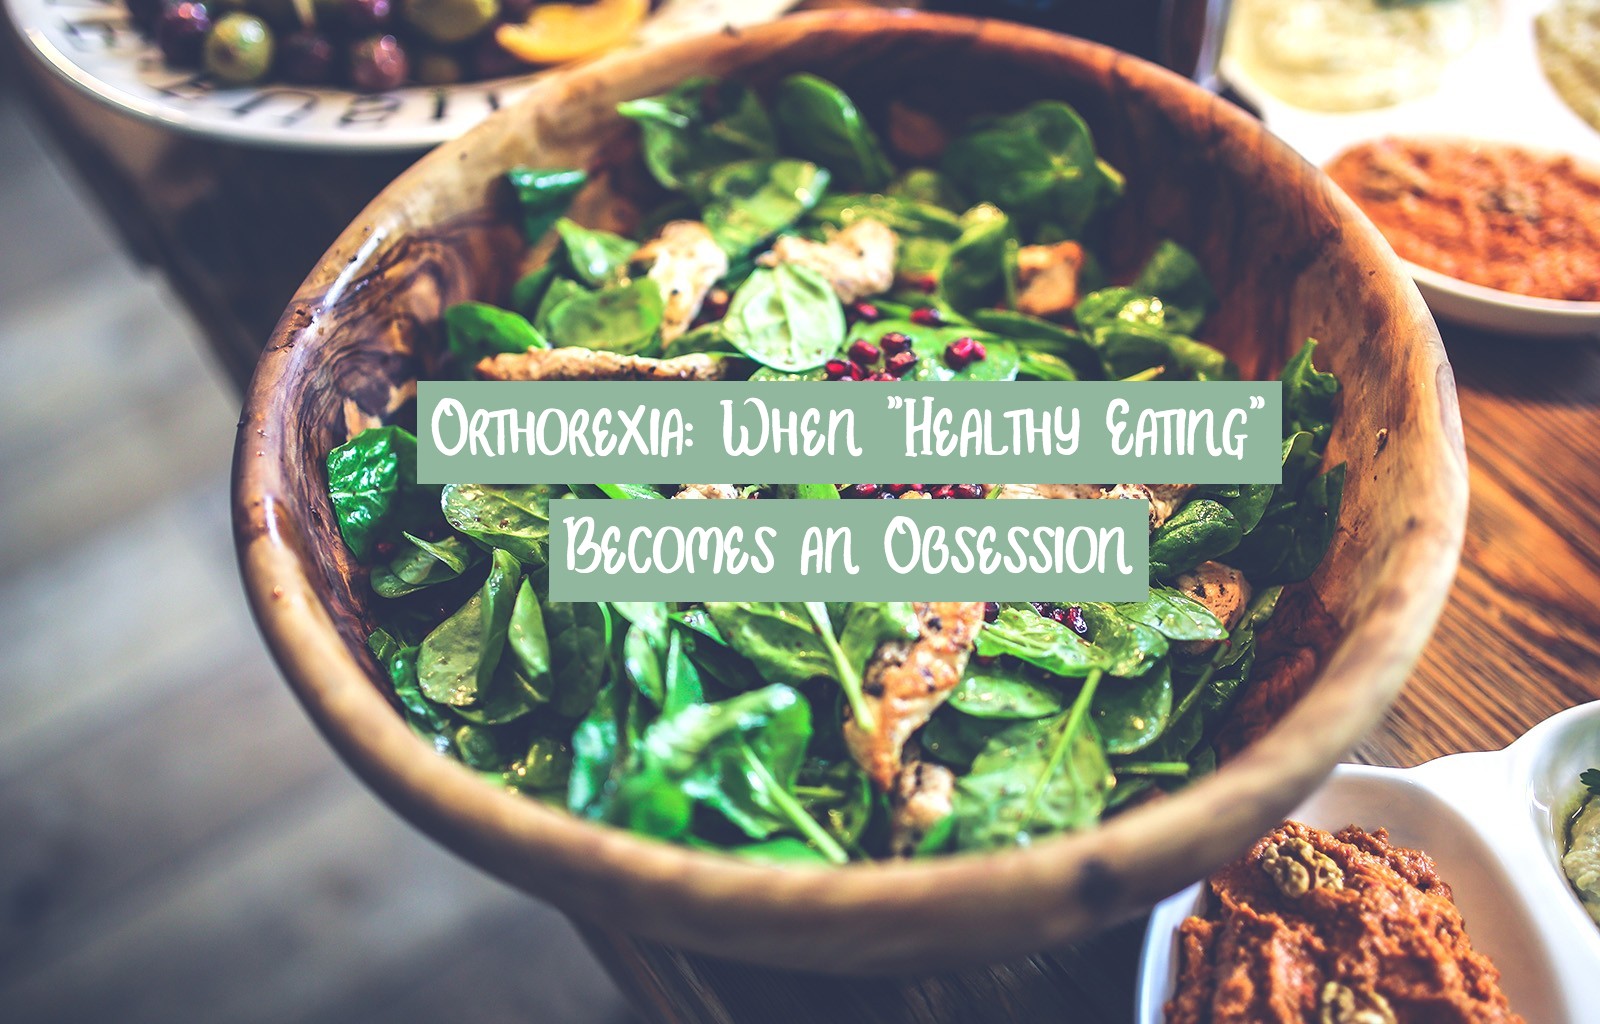 Orthorexia: When “Healthy Eating” Becomes an Obsession